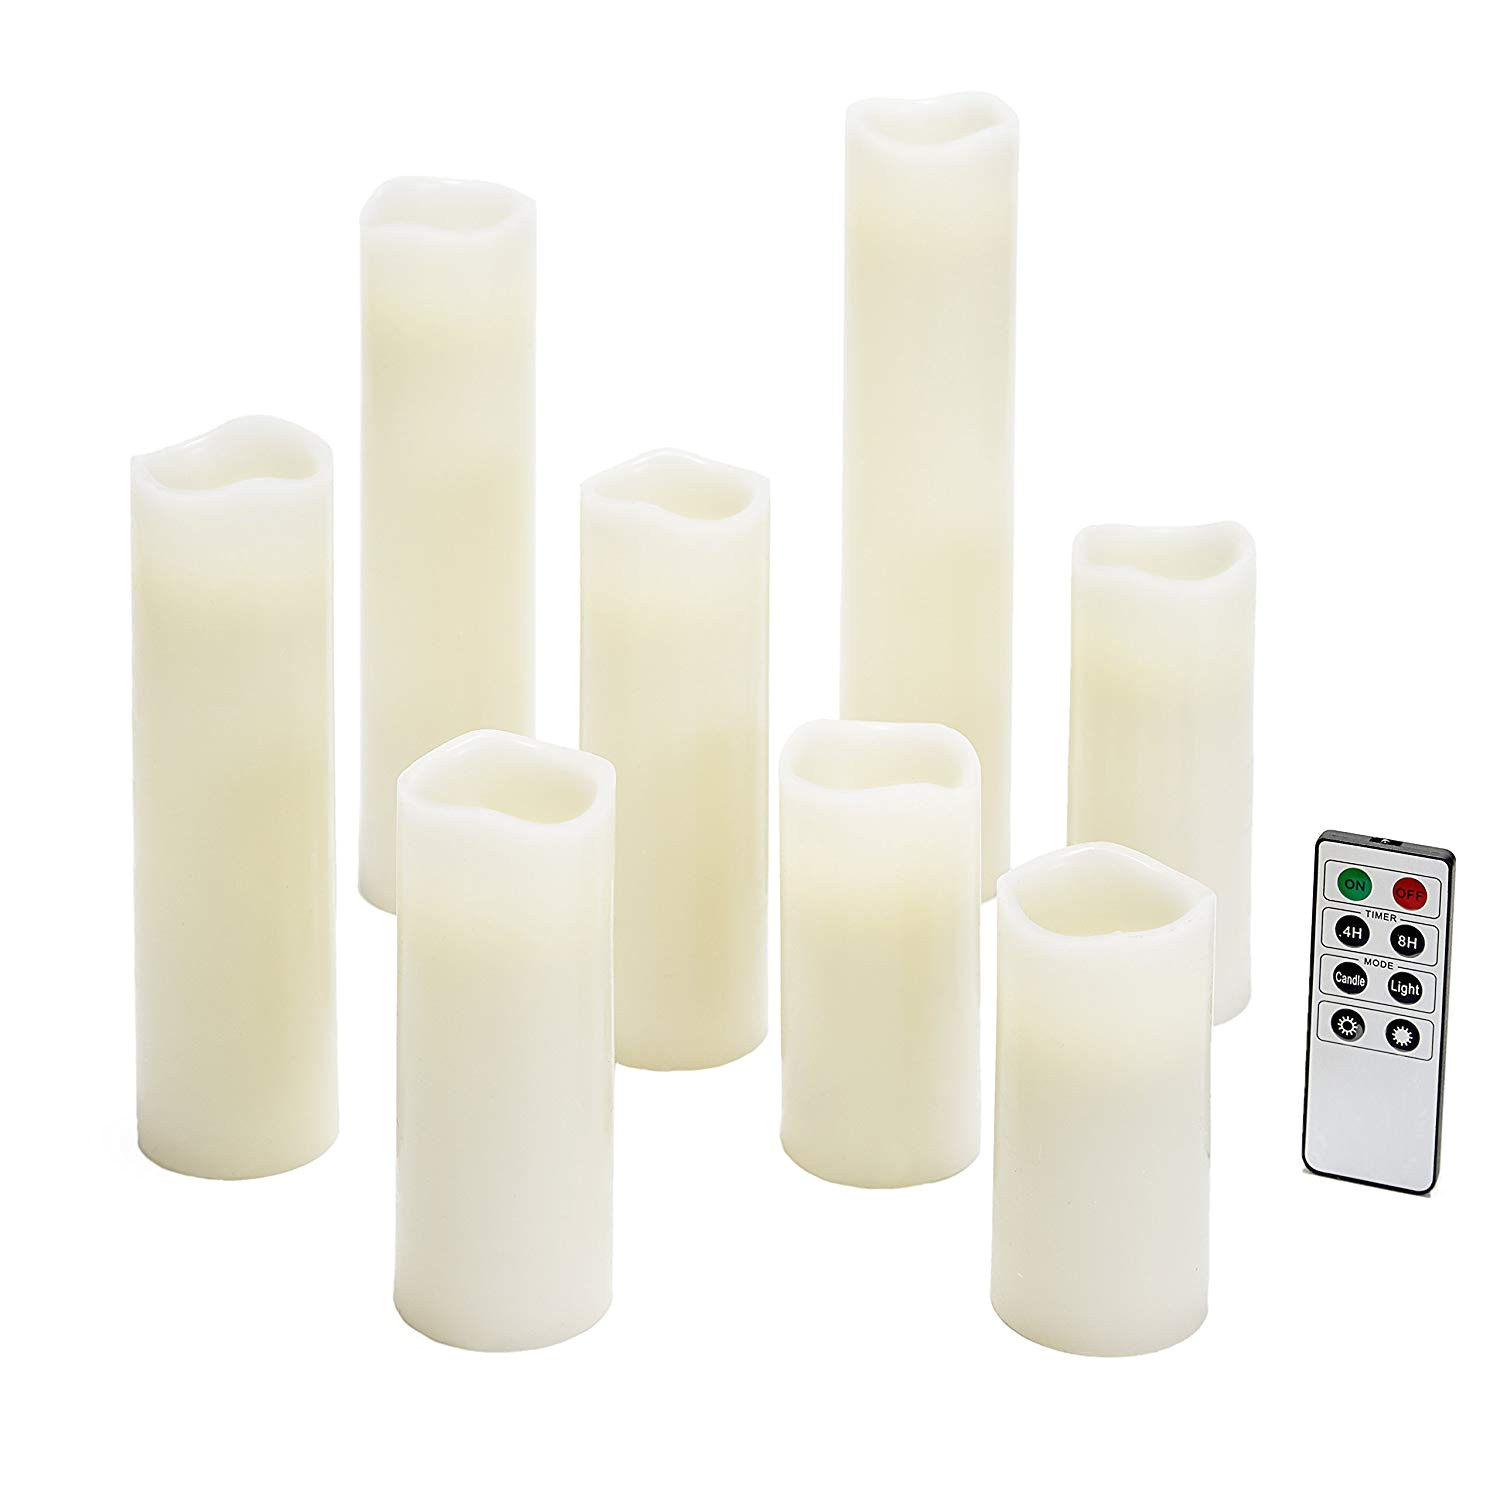 amazon com 8 ivory slim flameless candles with warm white leds smooth finish assorted sizes remote and batteries included home improvement